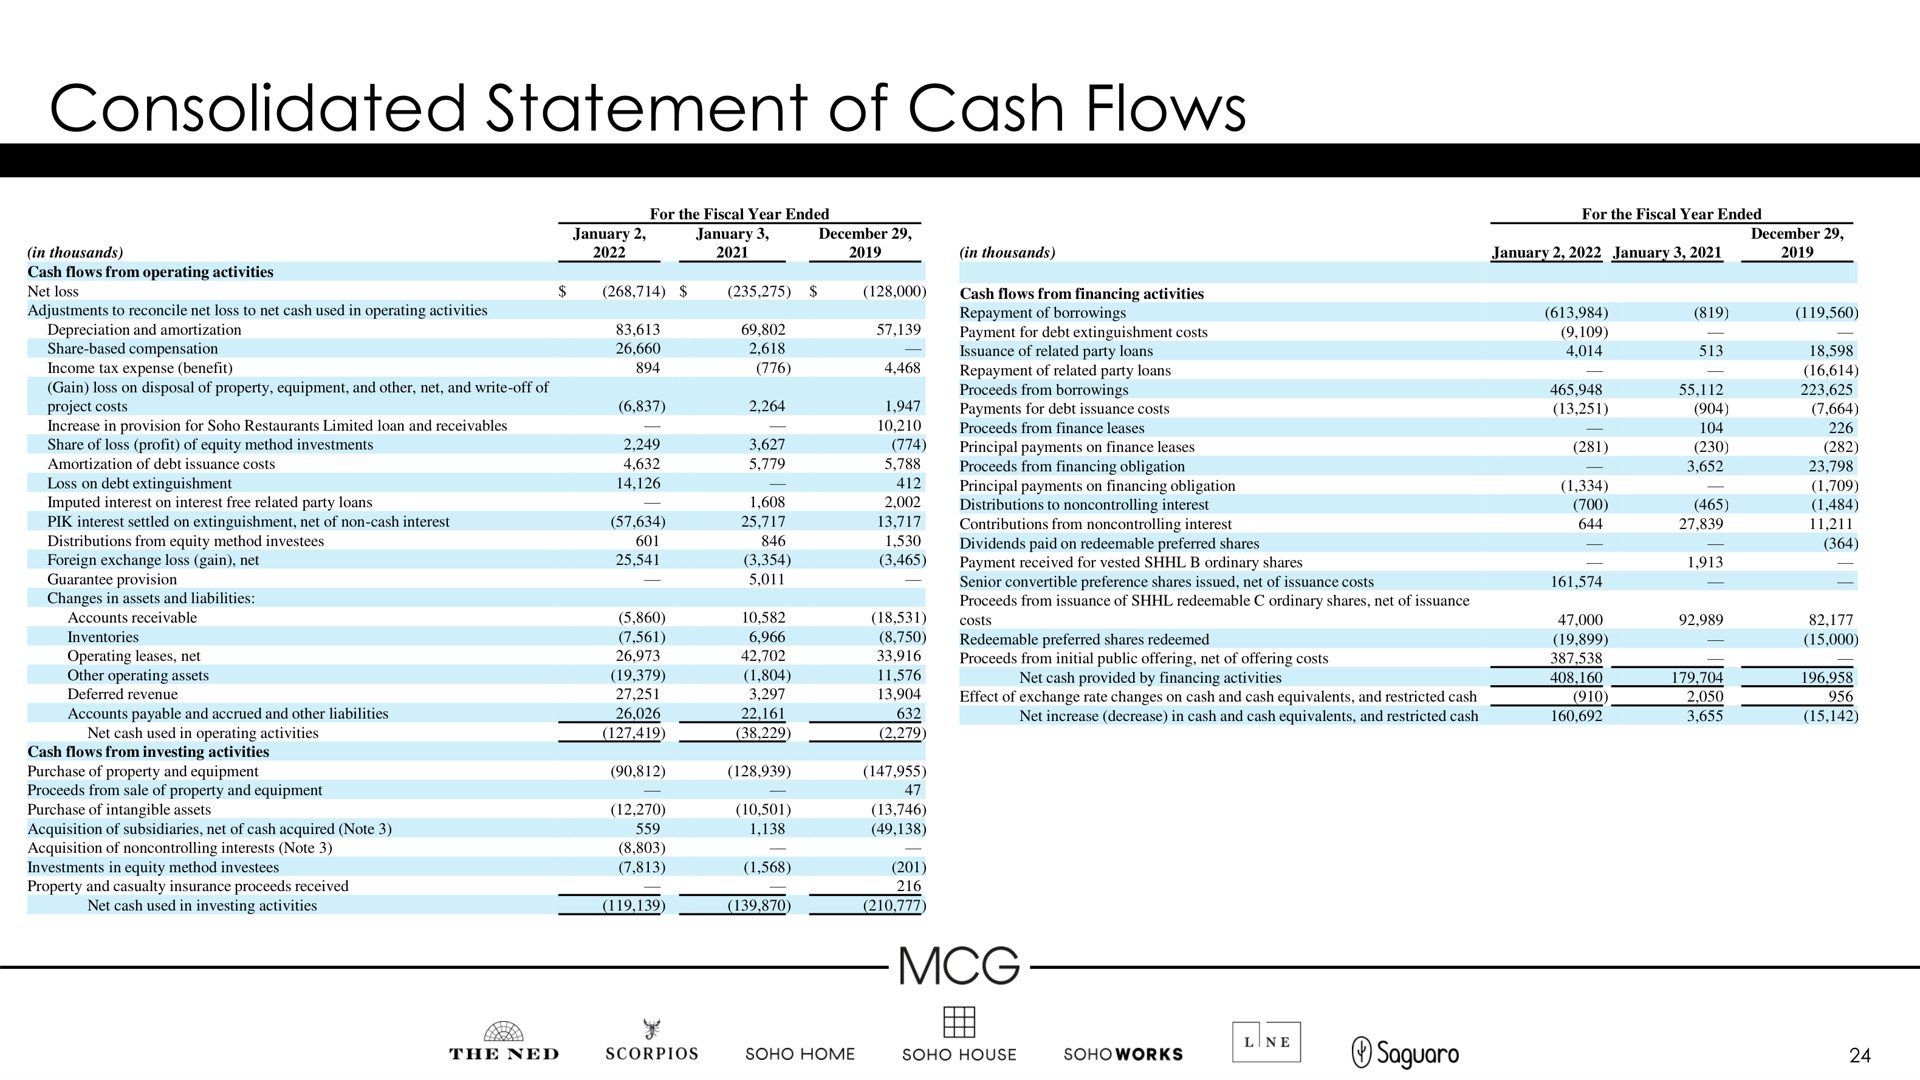 consolidated statement of cash flows | Membership Collective Group